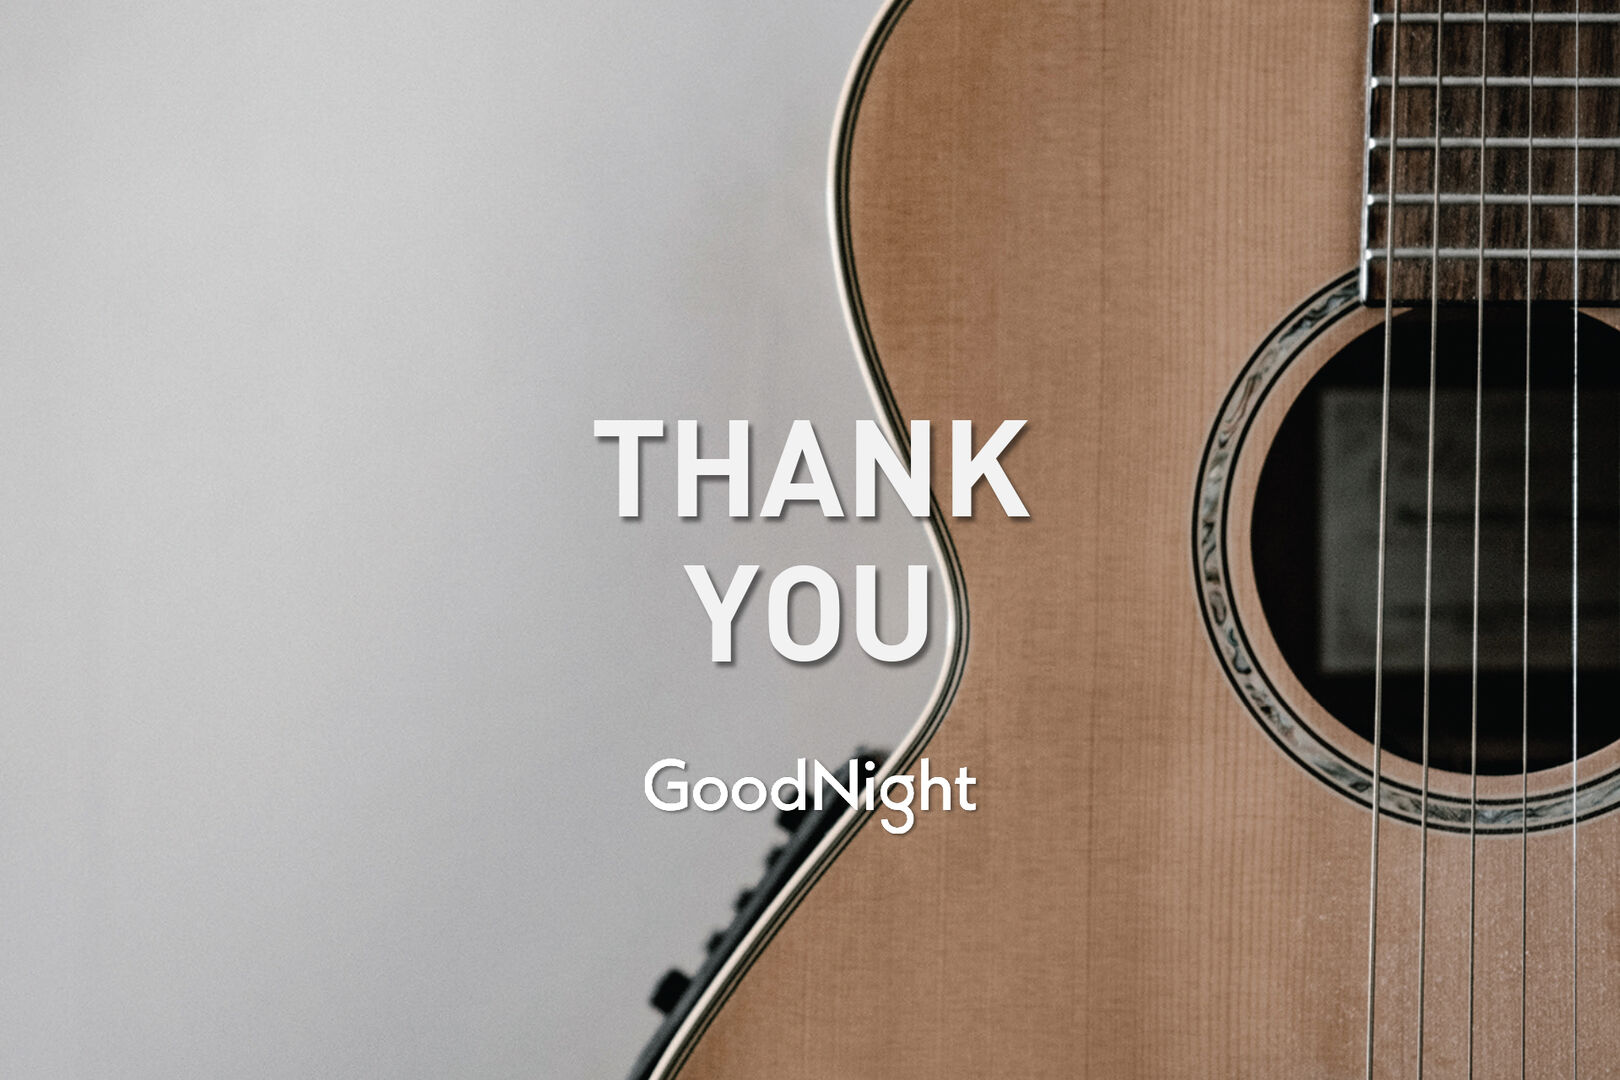 Thank you for inquiring with Goodnight Stay